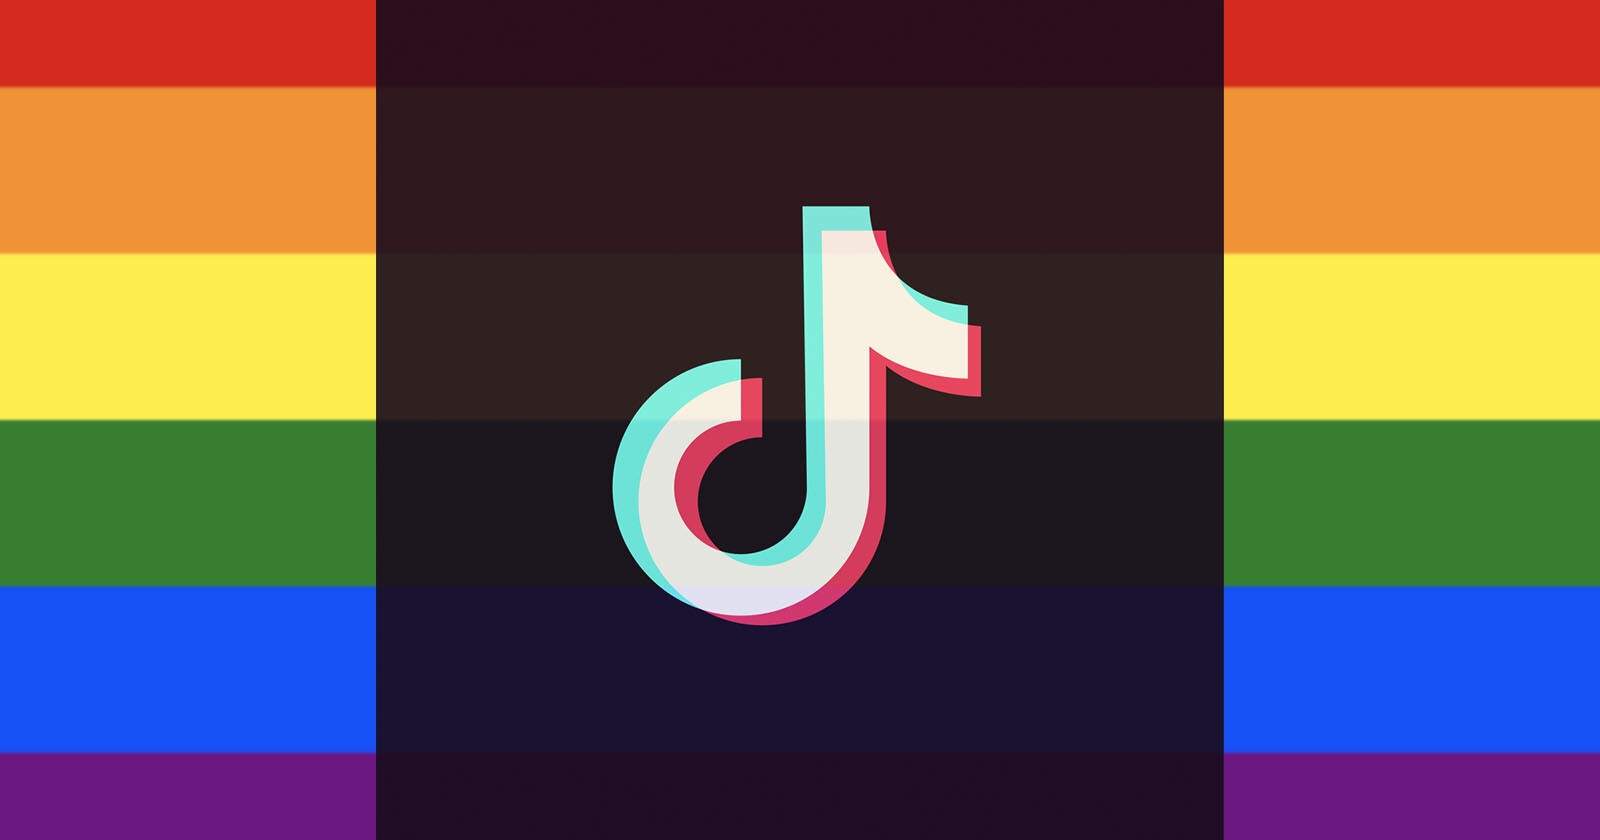  tiktok tracked users who watched gay content 